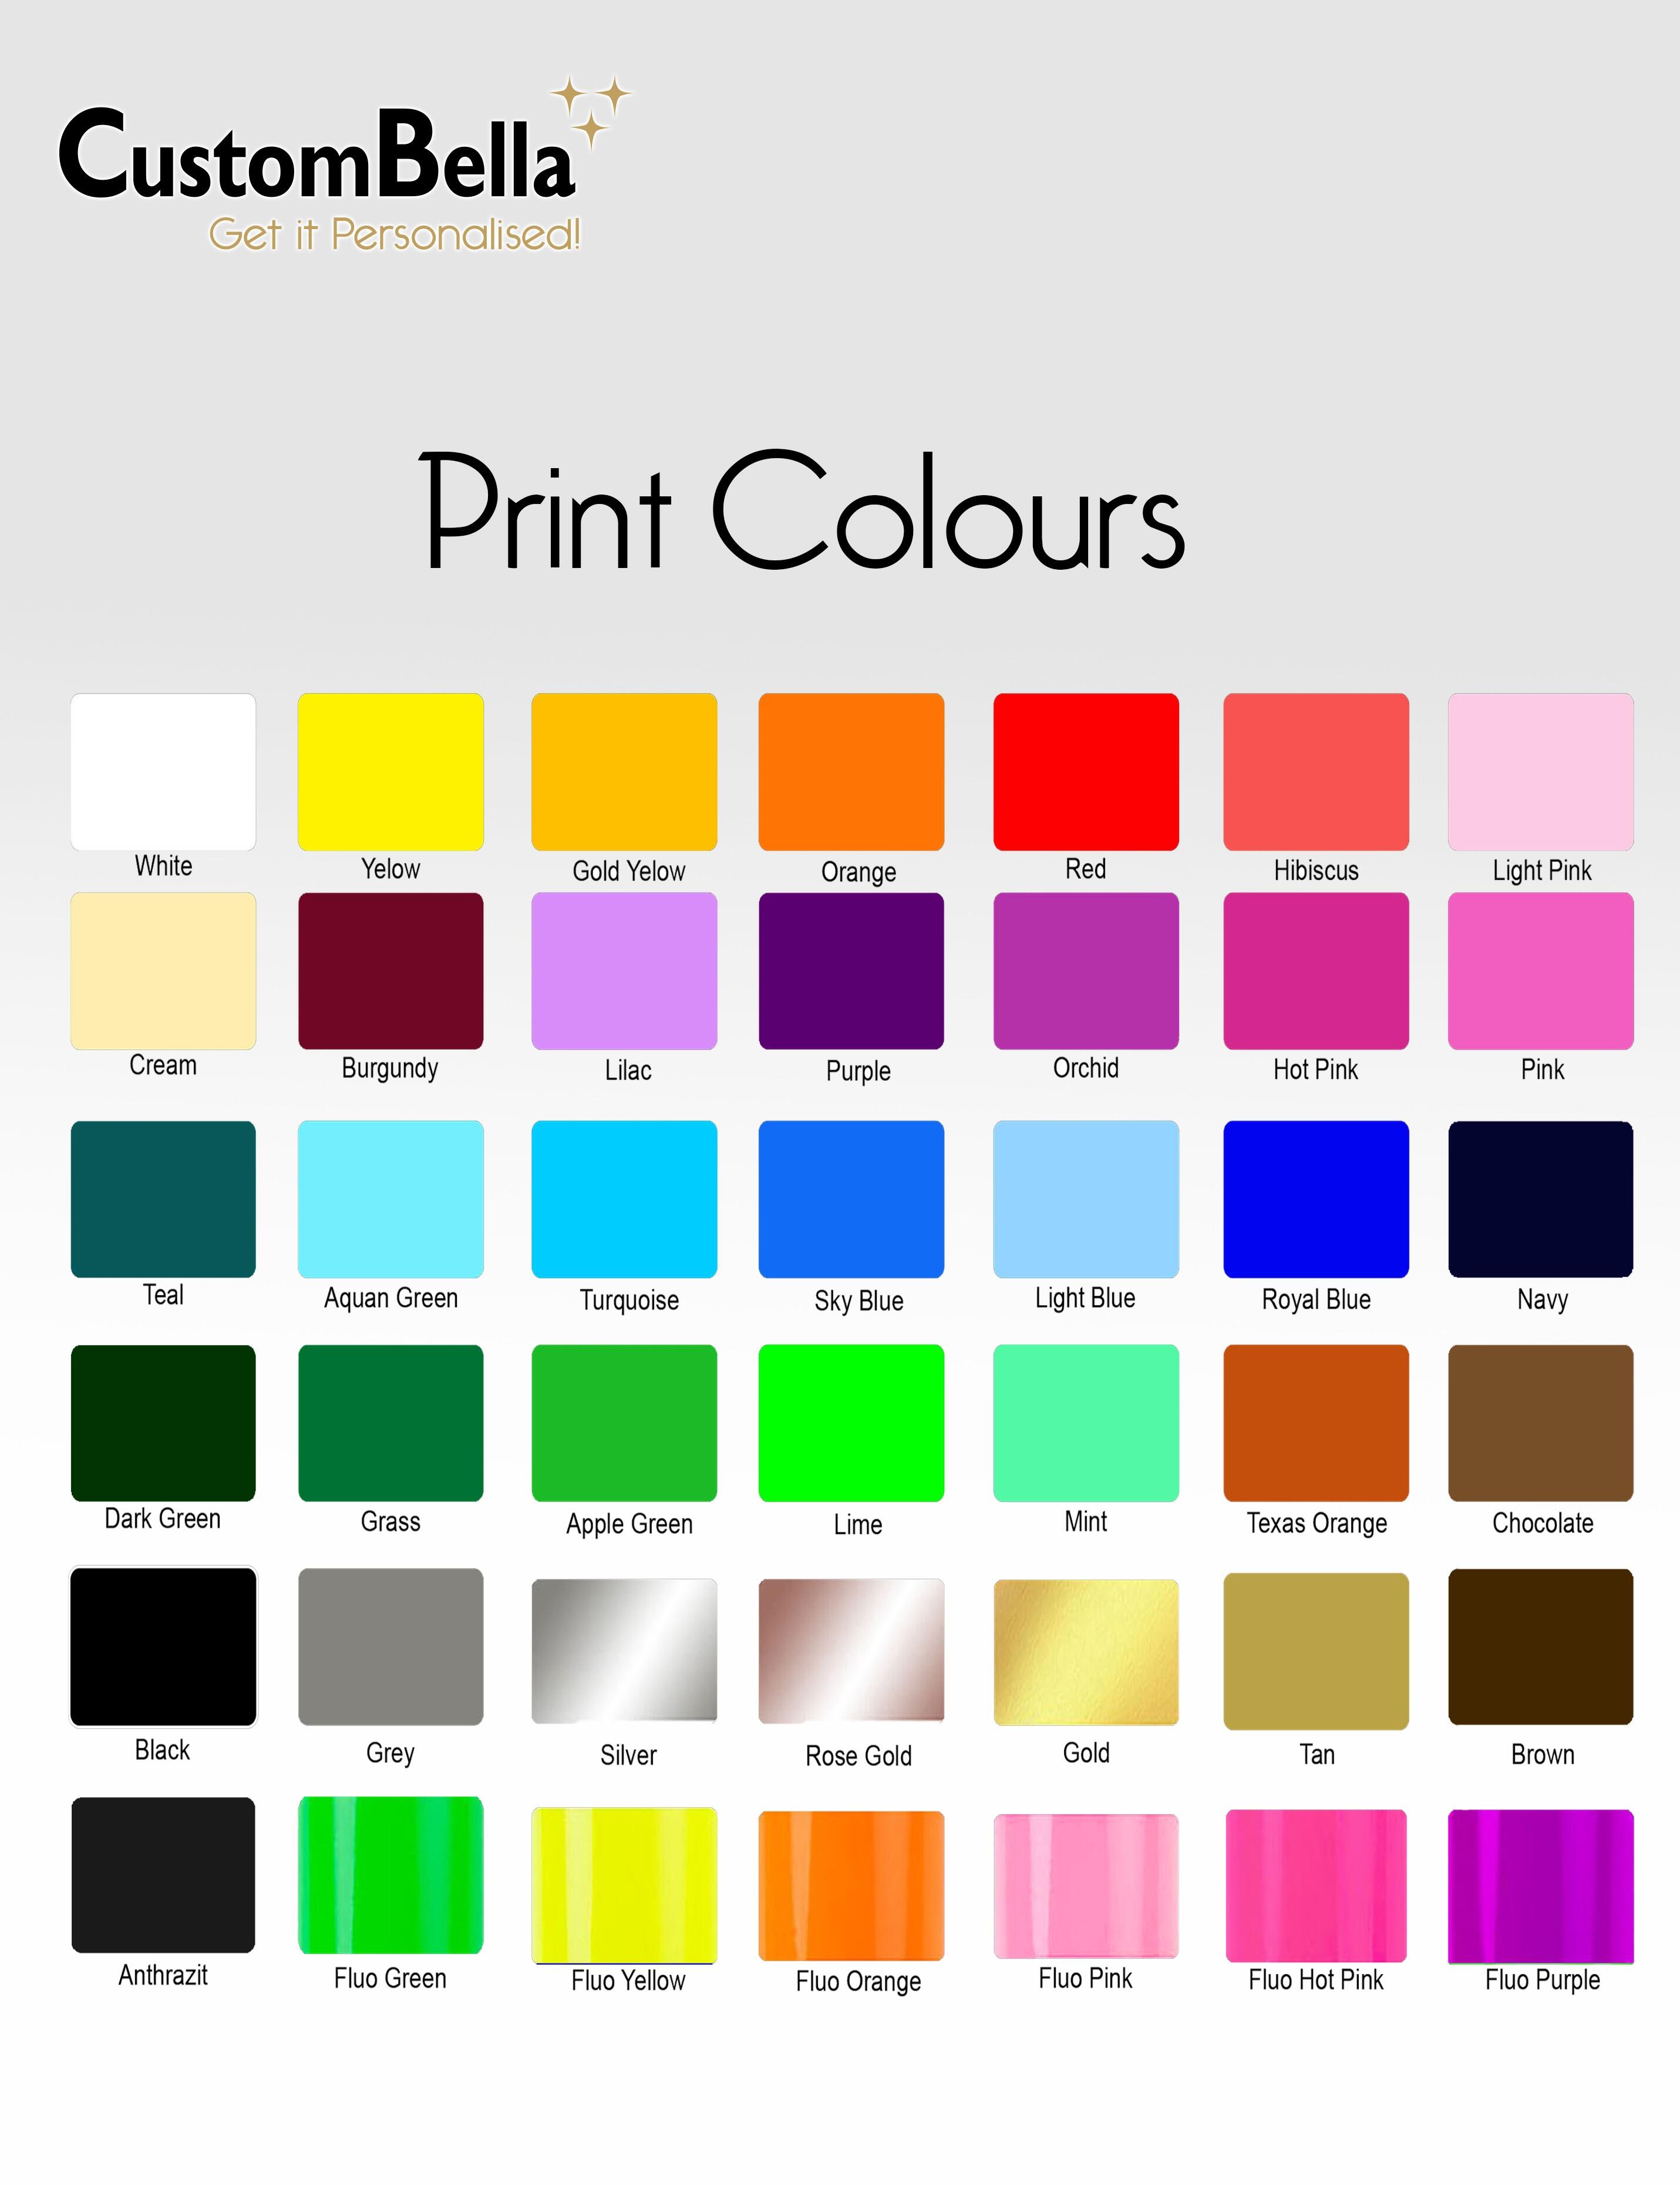 Custombella print colours to select to print